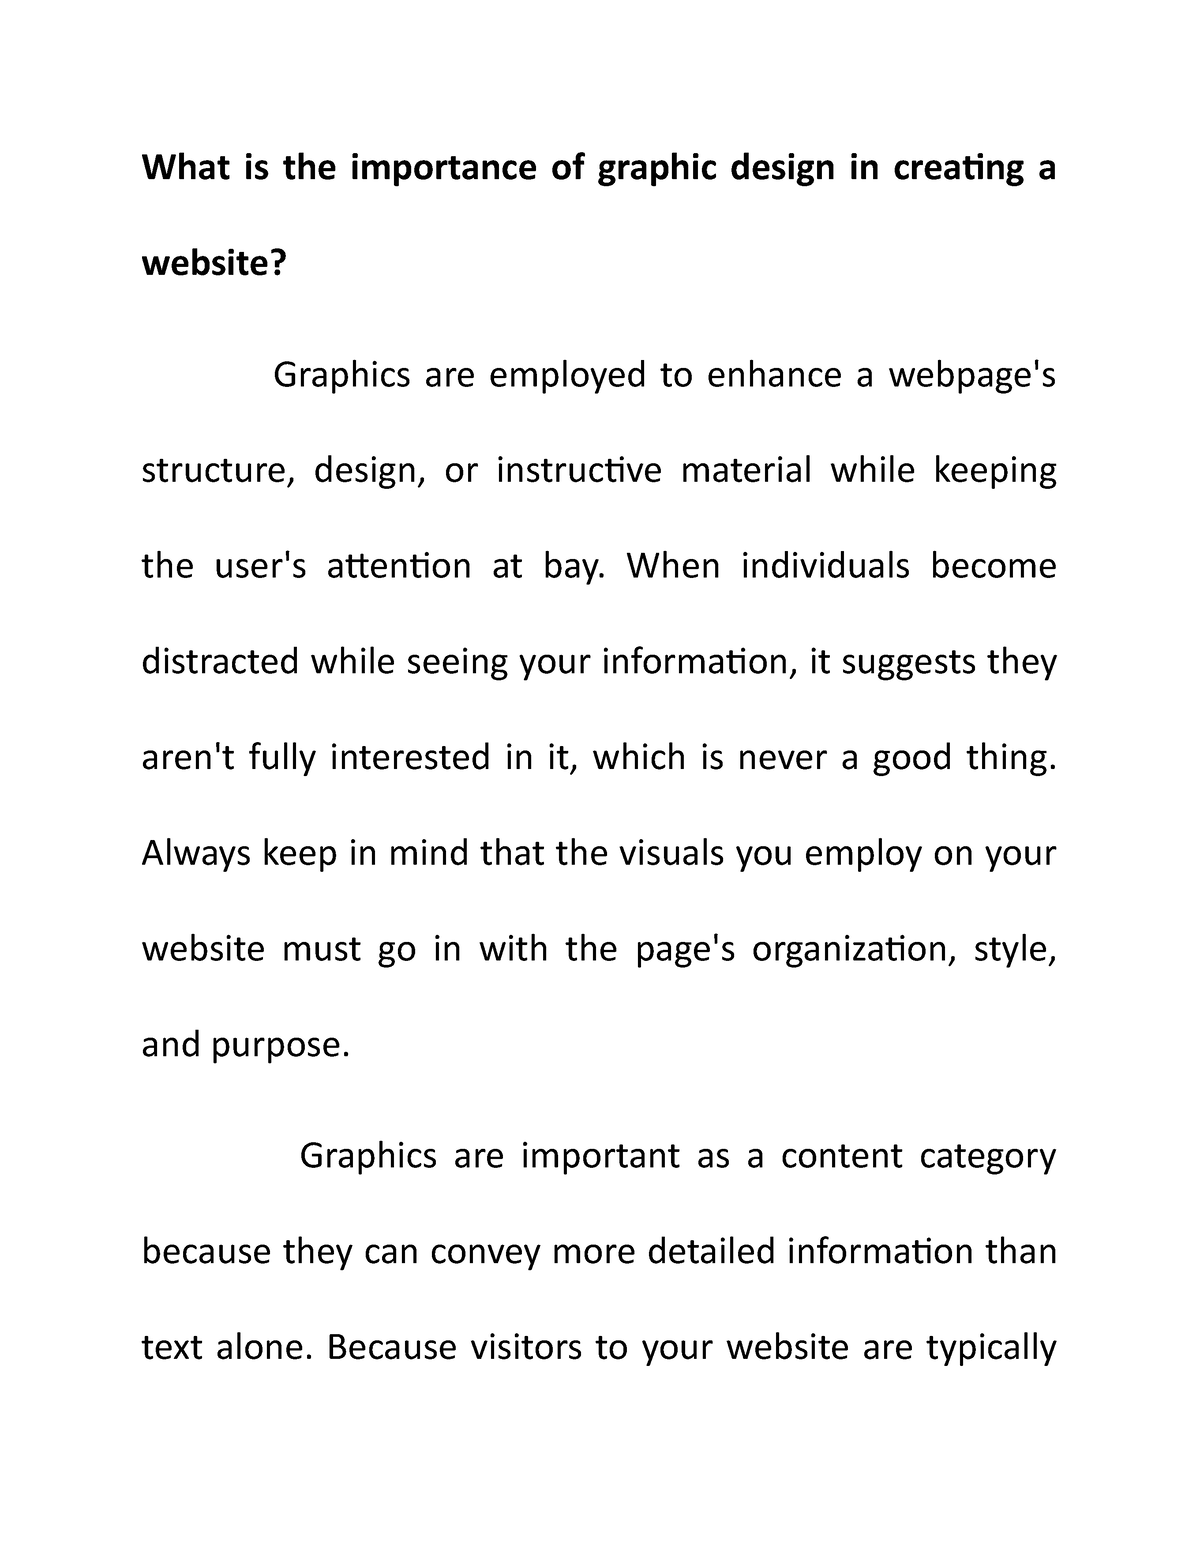 essay on the importance of graphic design